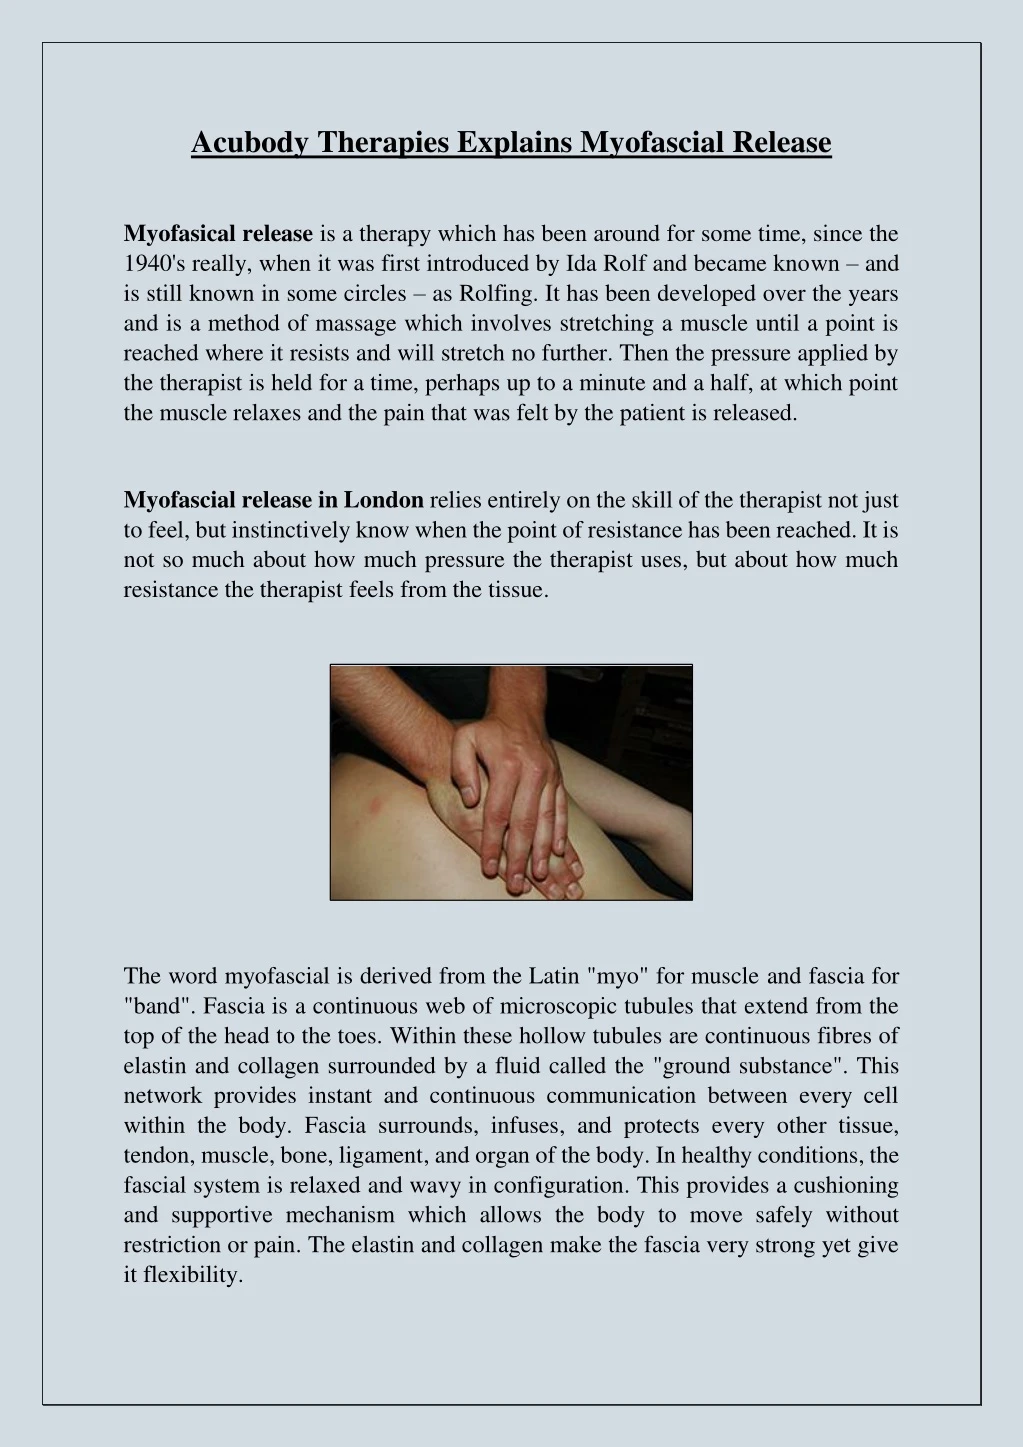 acubody therapies explains myofascial release